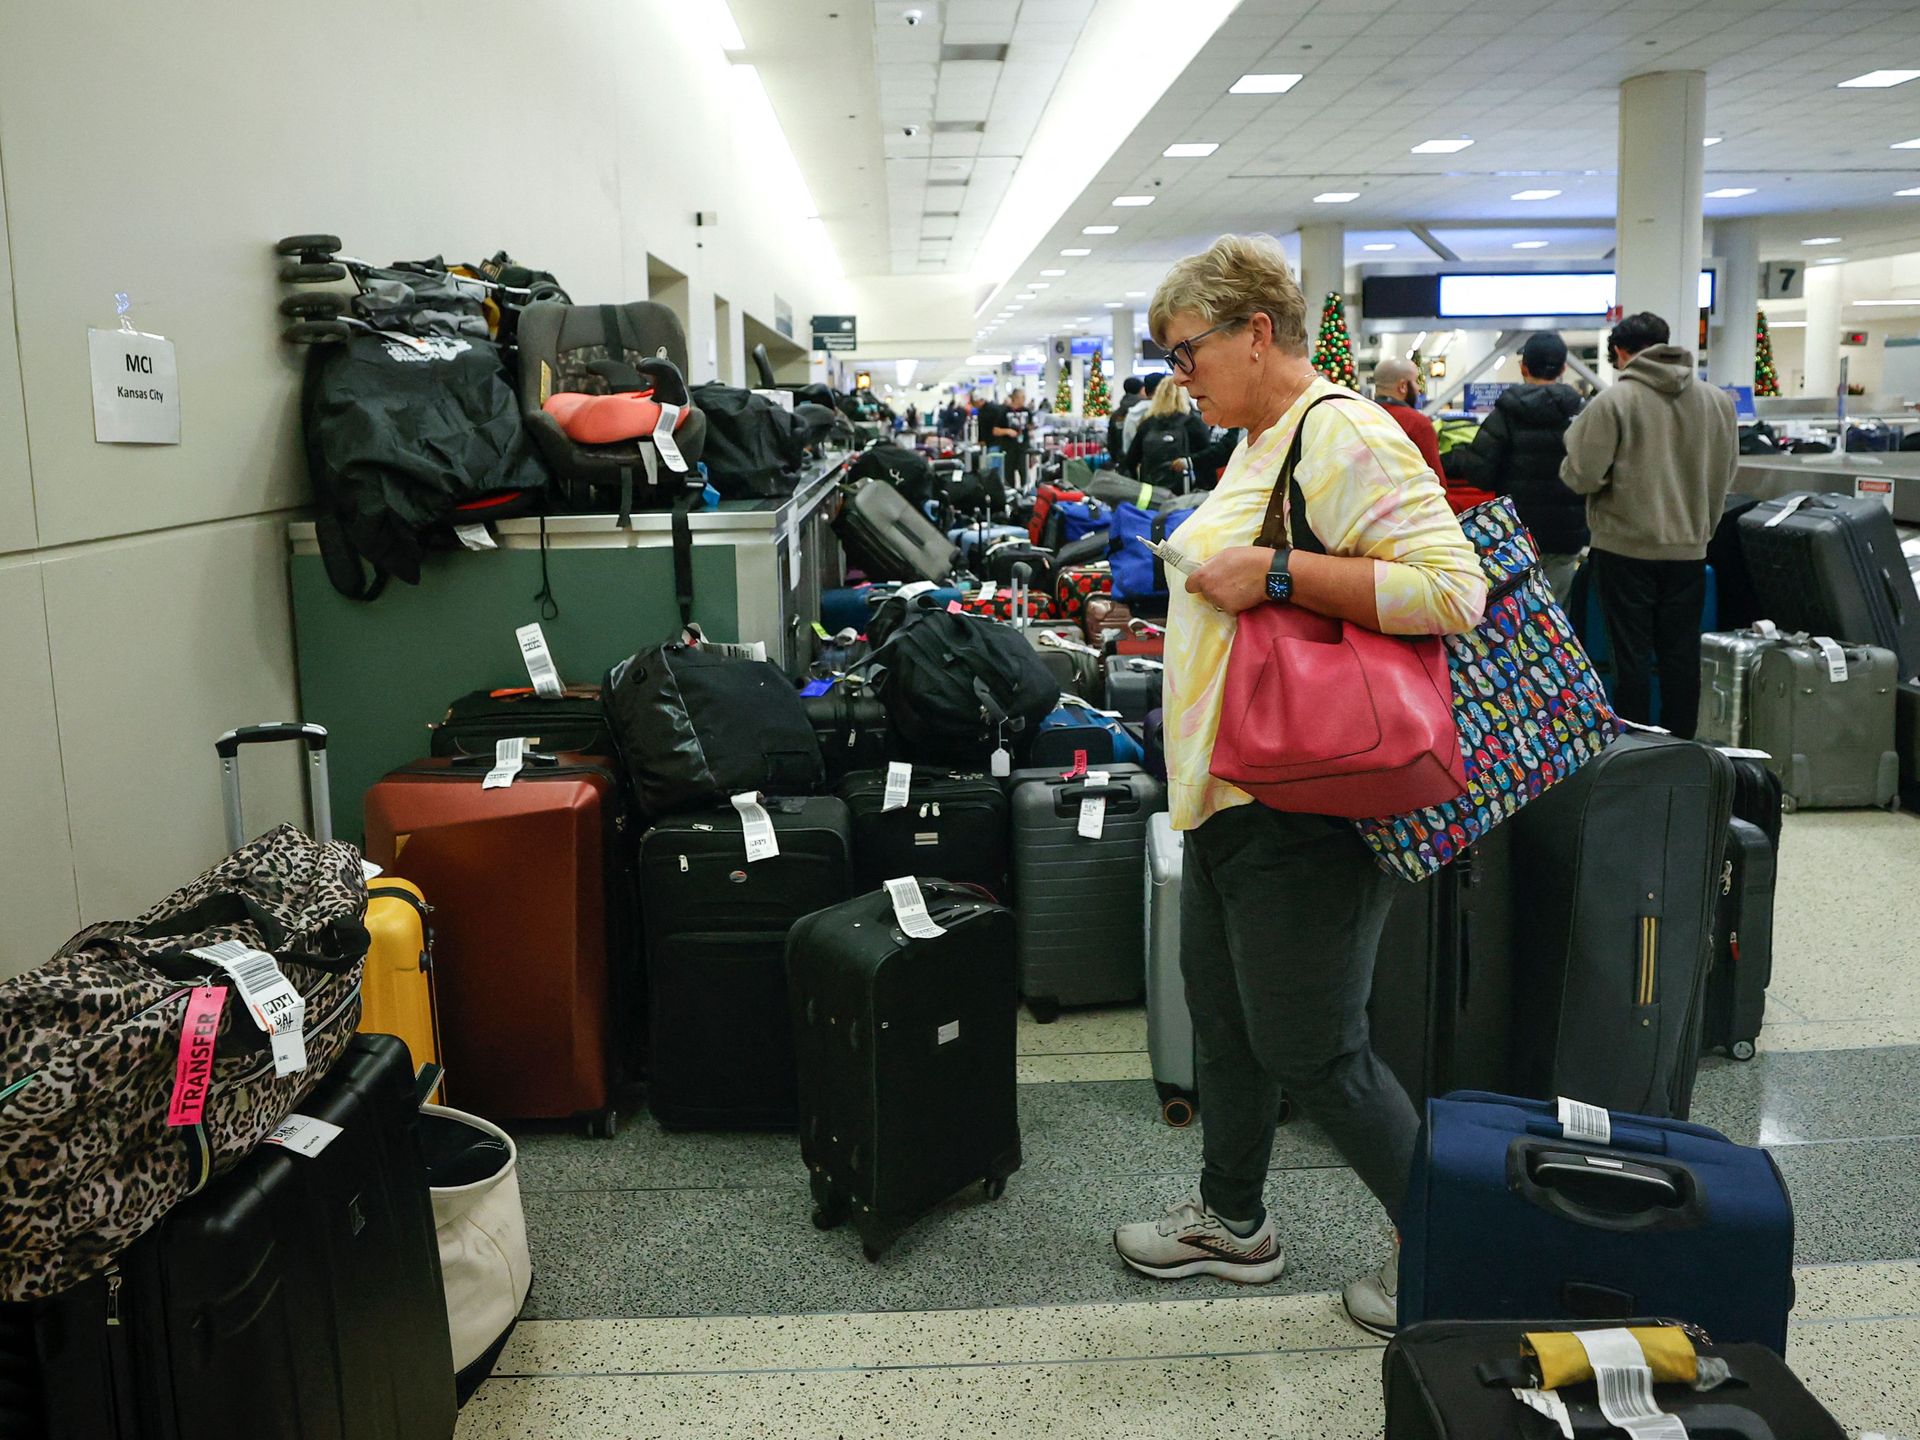 Southwest cancellations: What to know about lost luggage, baggage claims